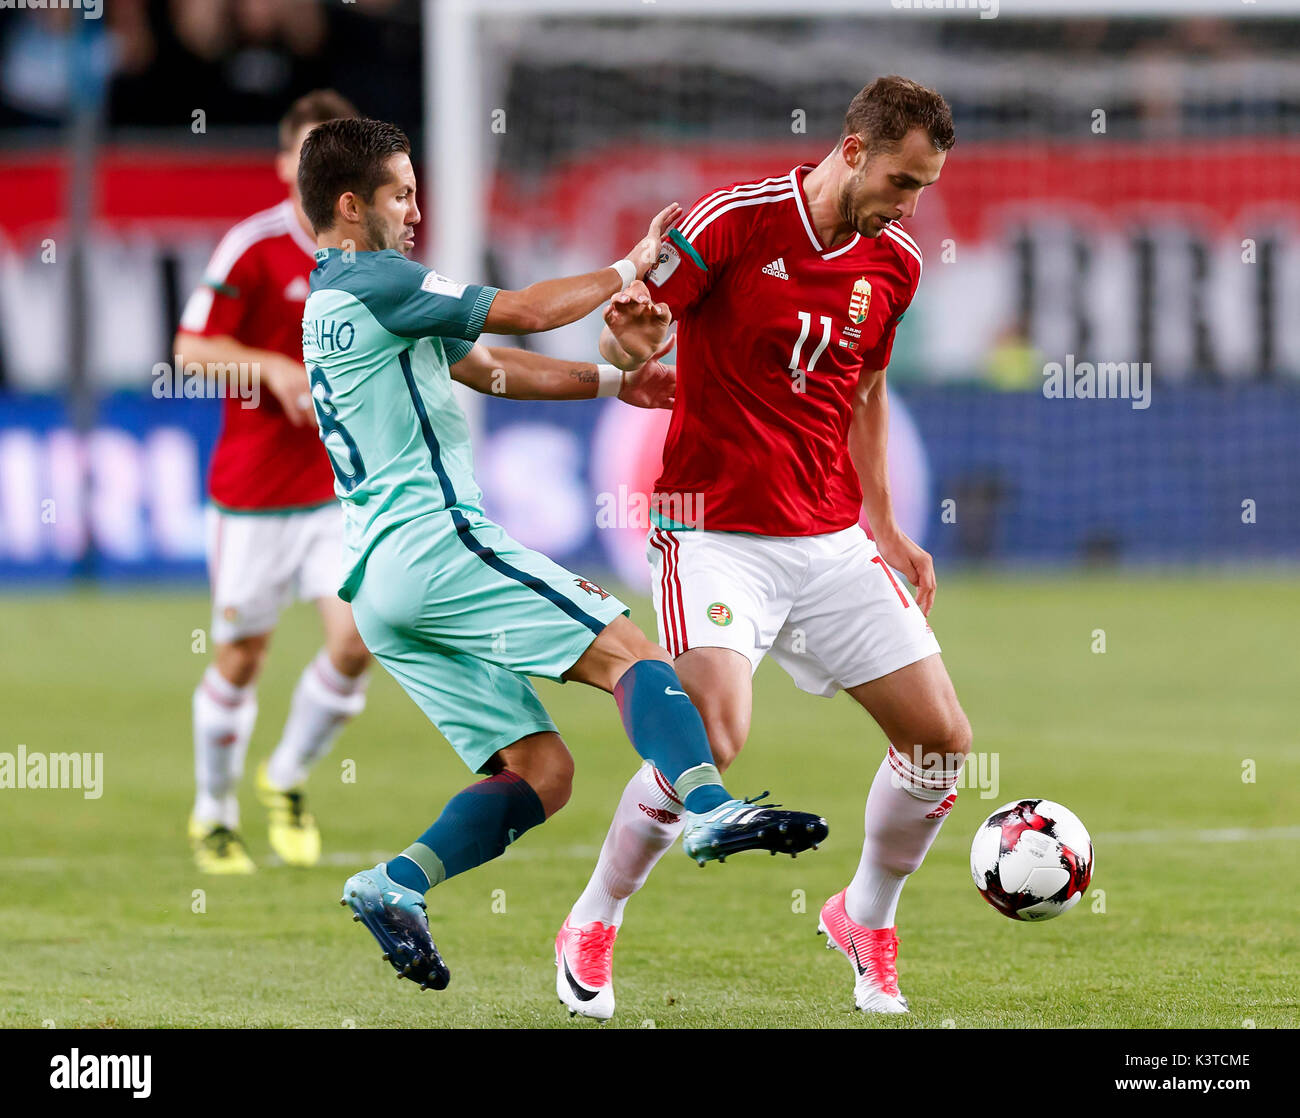 Budapest, Hungary. 03rd Sep, 2017. BUDAPEST, HUNGARY - SEPTEMBER 3: Marton Eppel #11 of Hungary battles for the ball with Joao Moutinho #8 of Portugal during the FIFA 2018 World Cup Qualifier match between Hungary and Portugal at Groupama Arena on September 3, 2017 in Budapest, Hungary. Credit: Laszlo Szirtesi/Alamy Live News Stock Photo